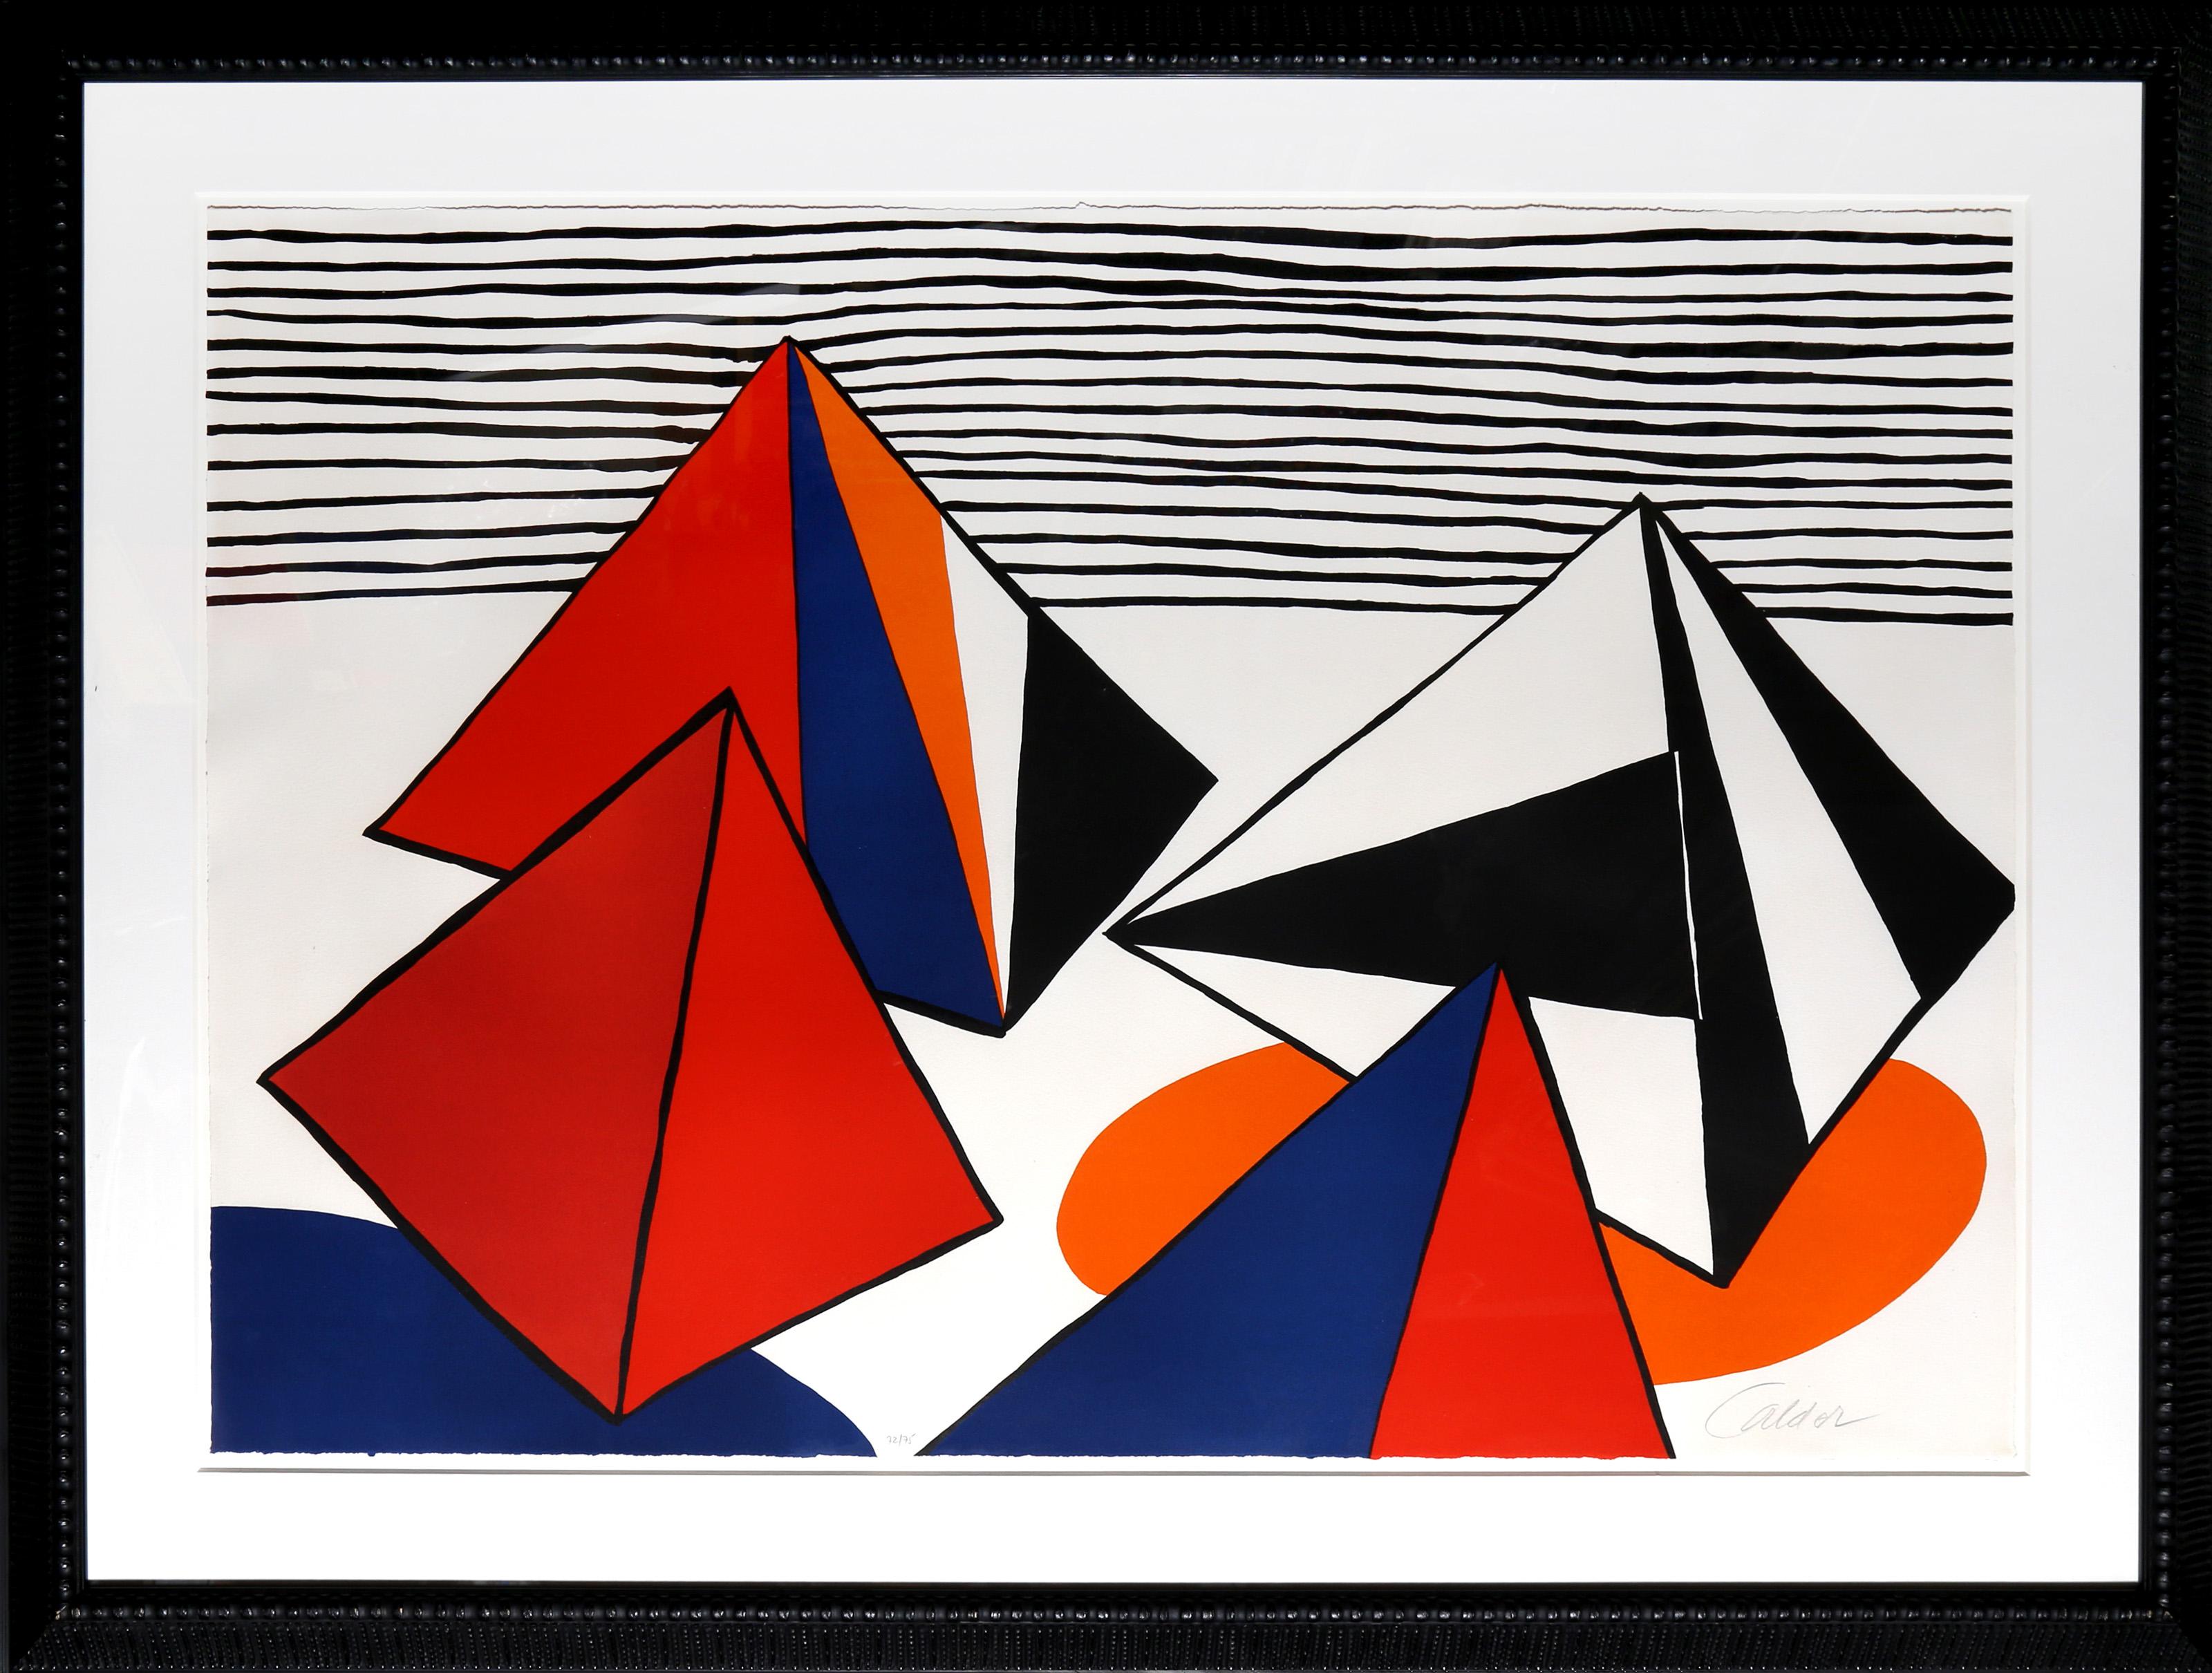 Alexander Calder, American (1898 - 1976) -  Les Pyramides Grandes. Year: 1975, Medium: Lithograph, signed and numbered in pencil, Edition: 72/75, Size: 29.5 x 43 in. (74.93 x 109.22 cm), Frame Size: 40.5 x 54 inches, Publisher: Maeght, Paris 